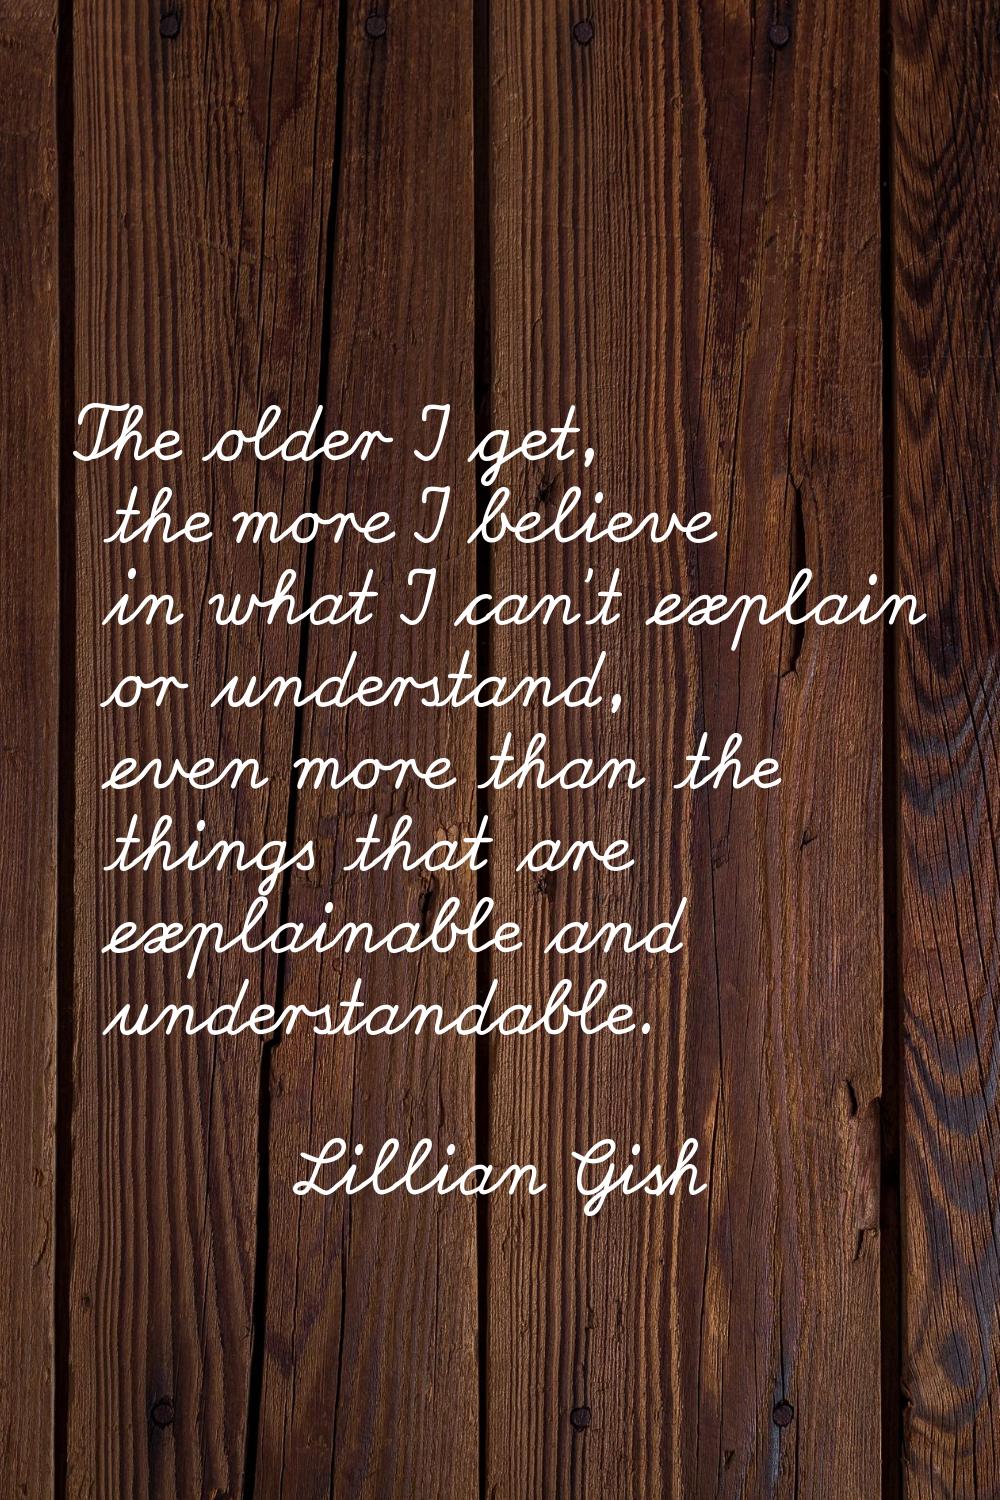 The older I get, the more I believe in what I can't explain or understand, even more than the thing